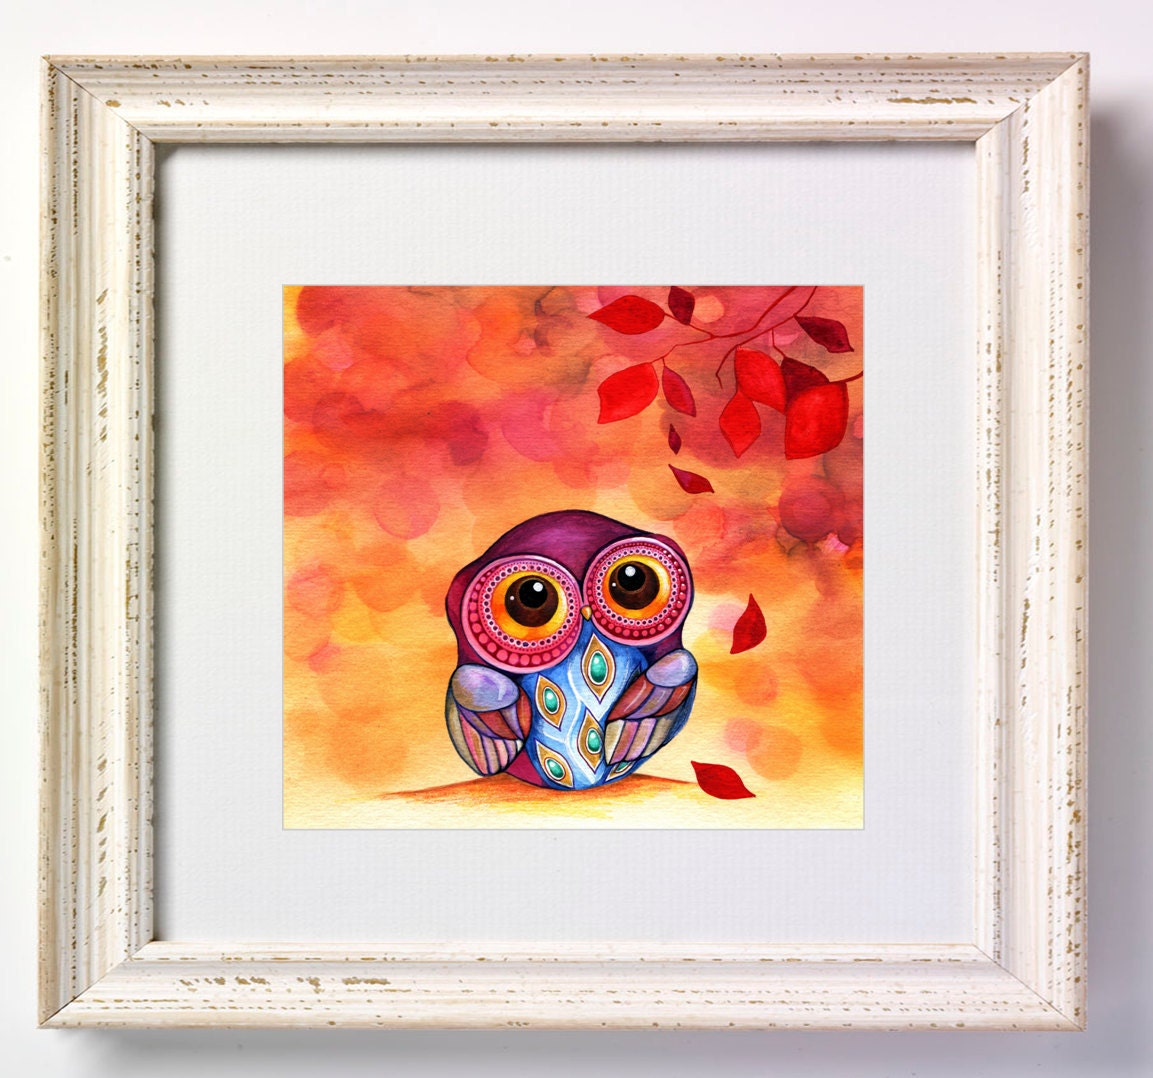 ORIGINAL Painting - Owls First Fall Leaves - by Annya Kai - Colorful Whimsical Animal Bird Artwork